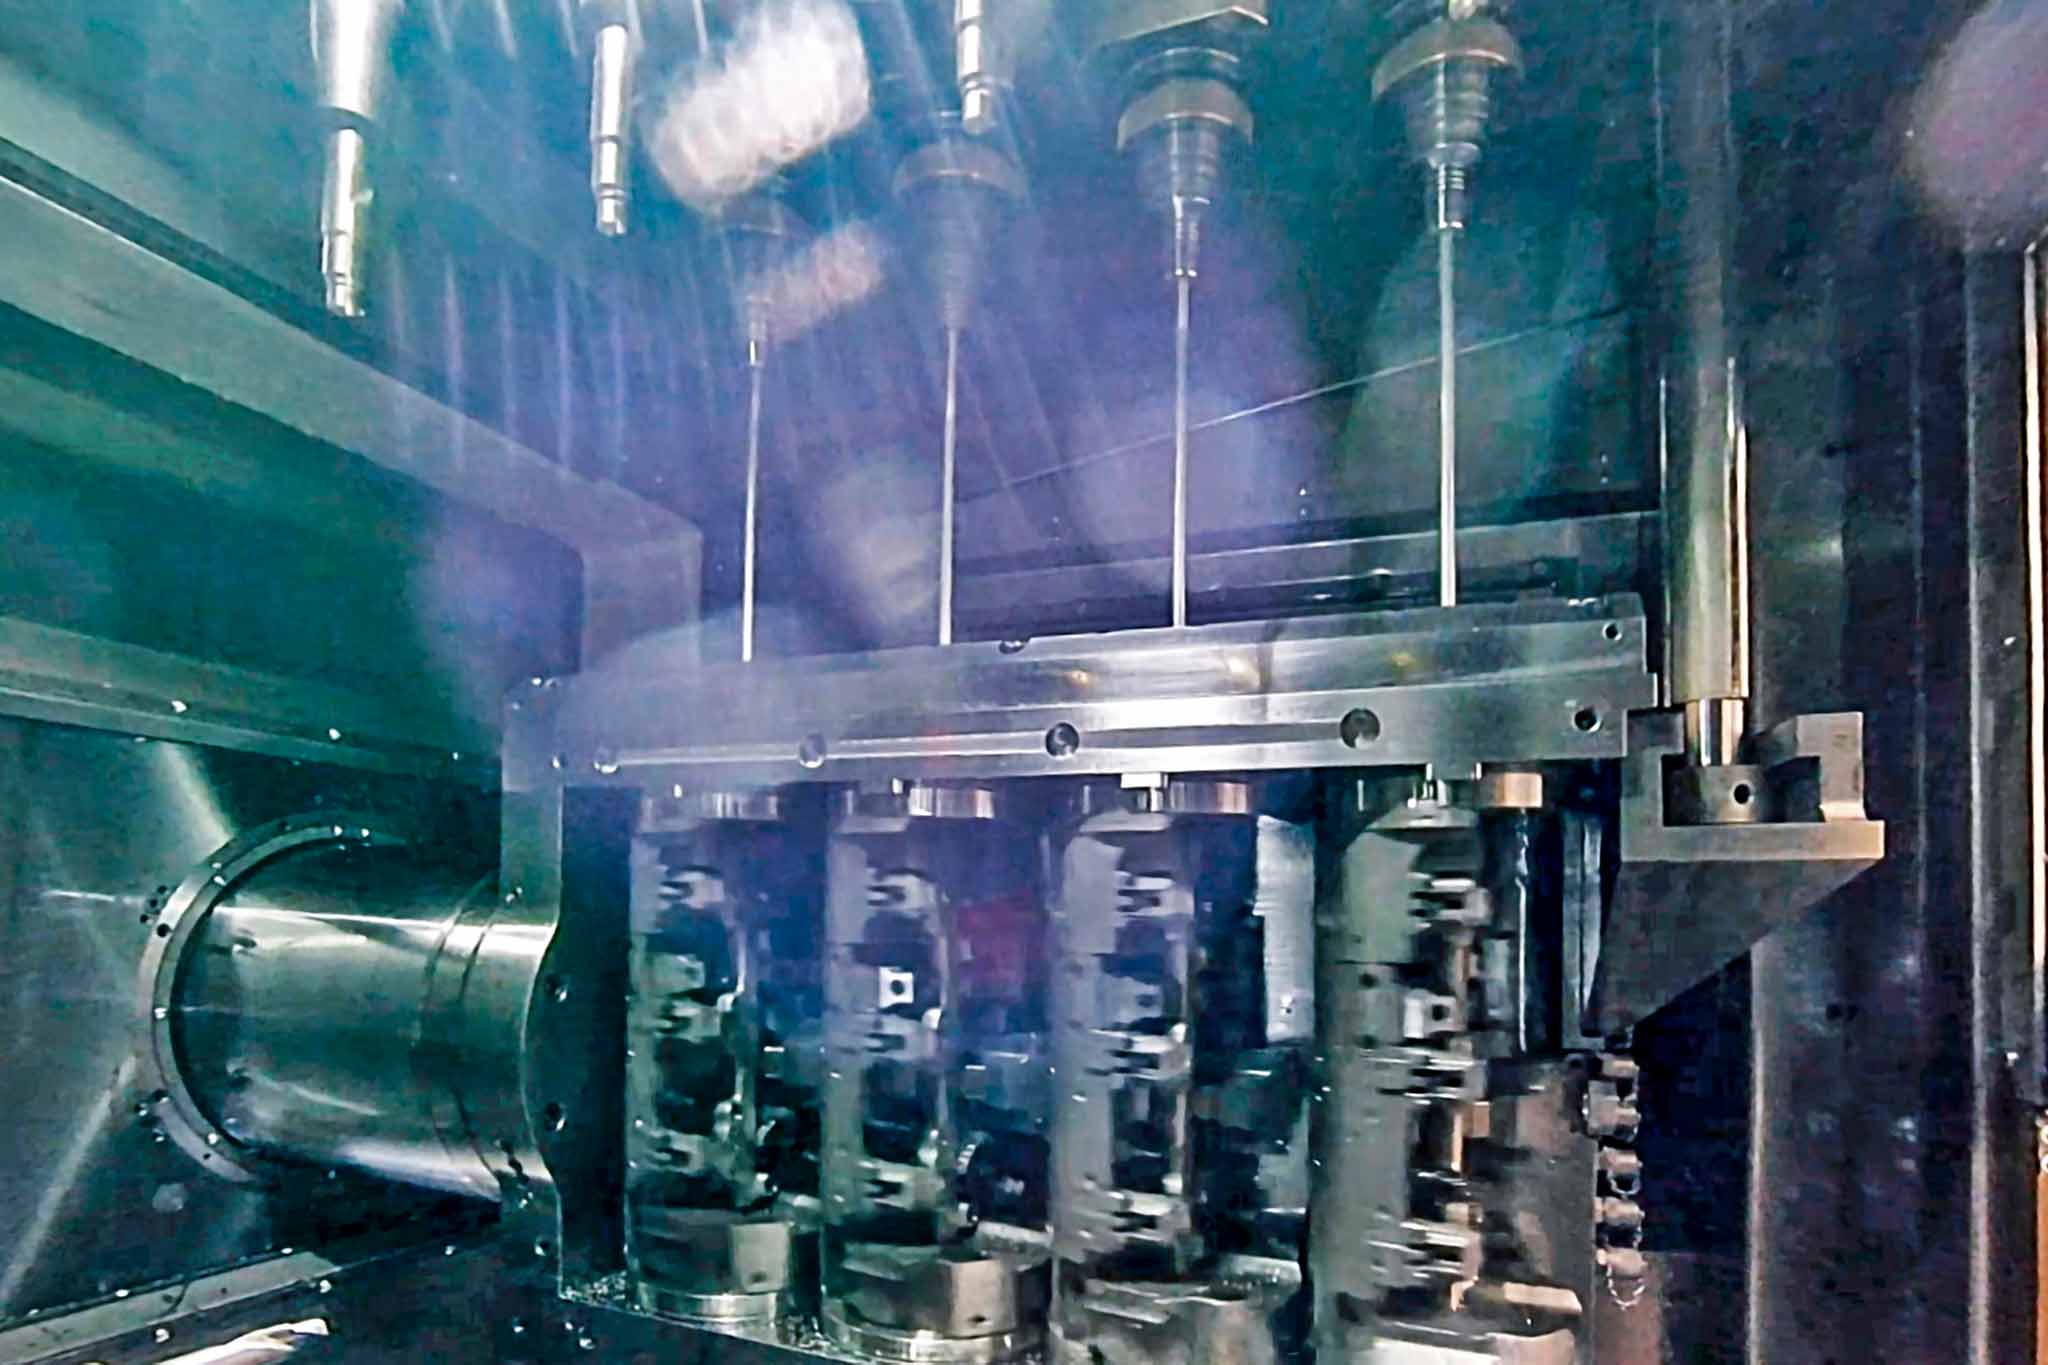 Four deep drills can be seen in the manufacturing module during the machining of fuel distributors.